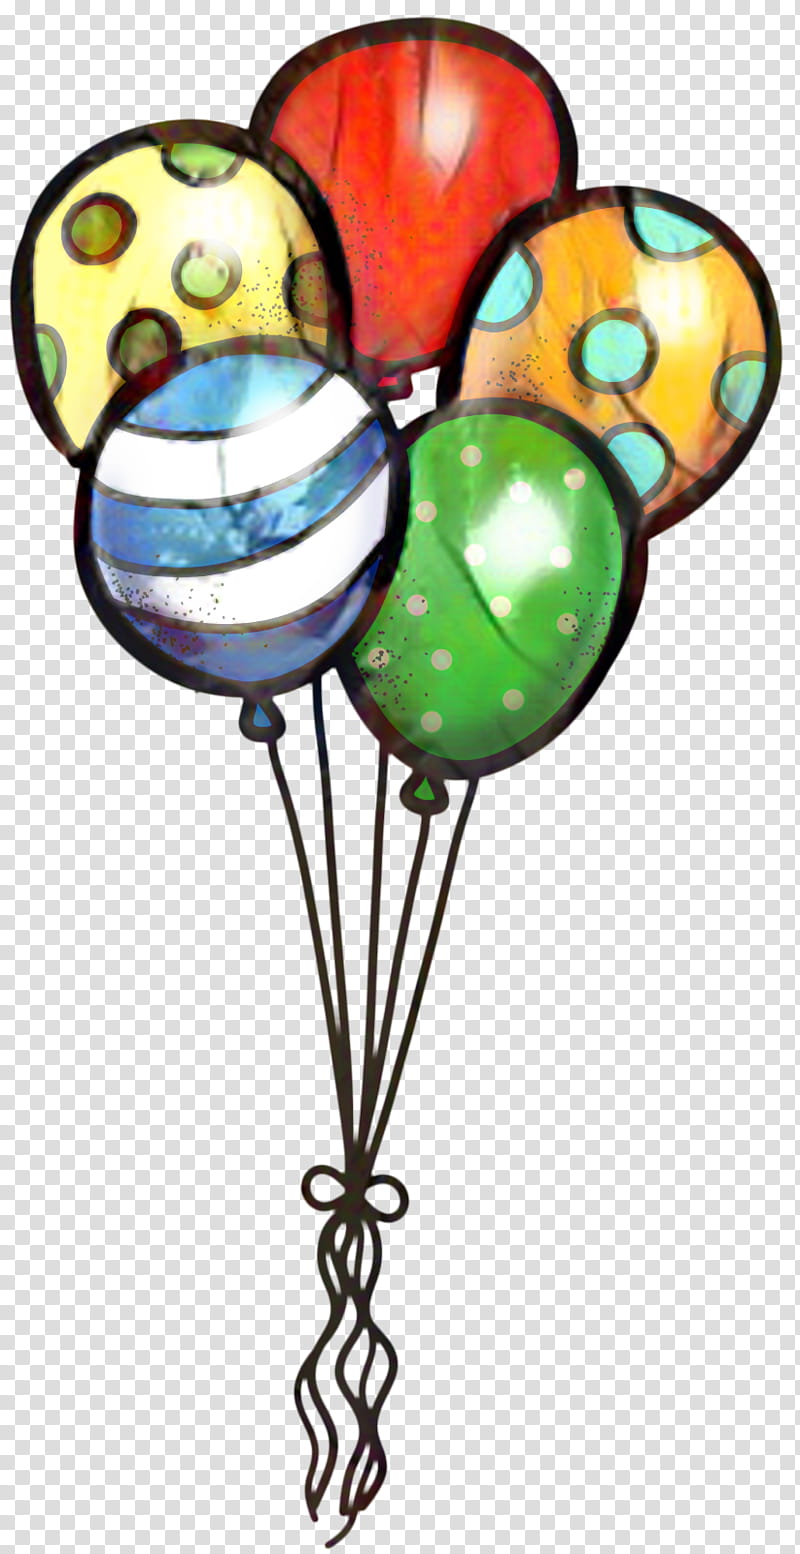 Balloon Drawing, Lesson, 2018, Beau, Education
, Lesson Plan, School
, Rhotacism transparent background PNG clipart